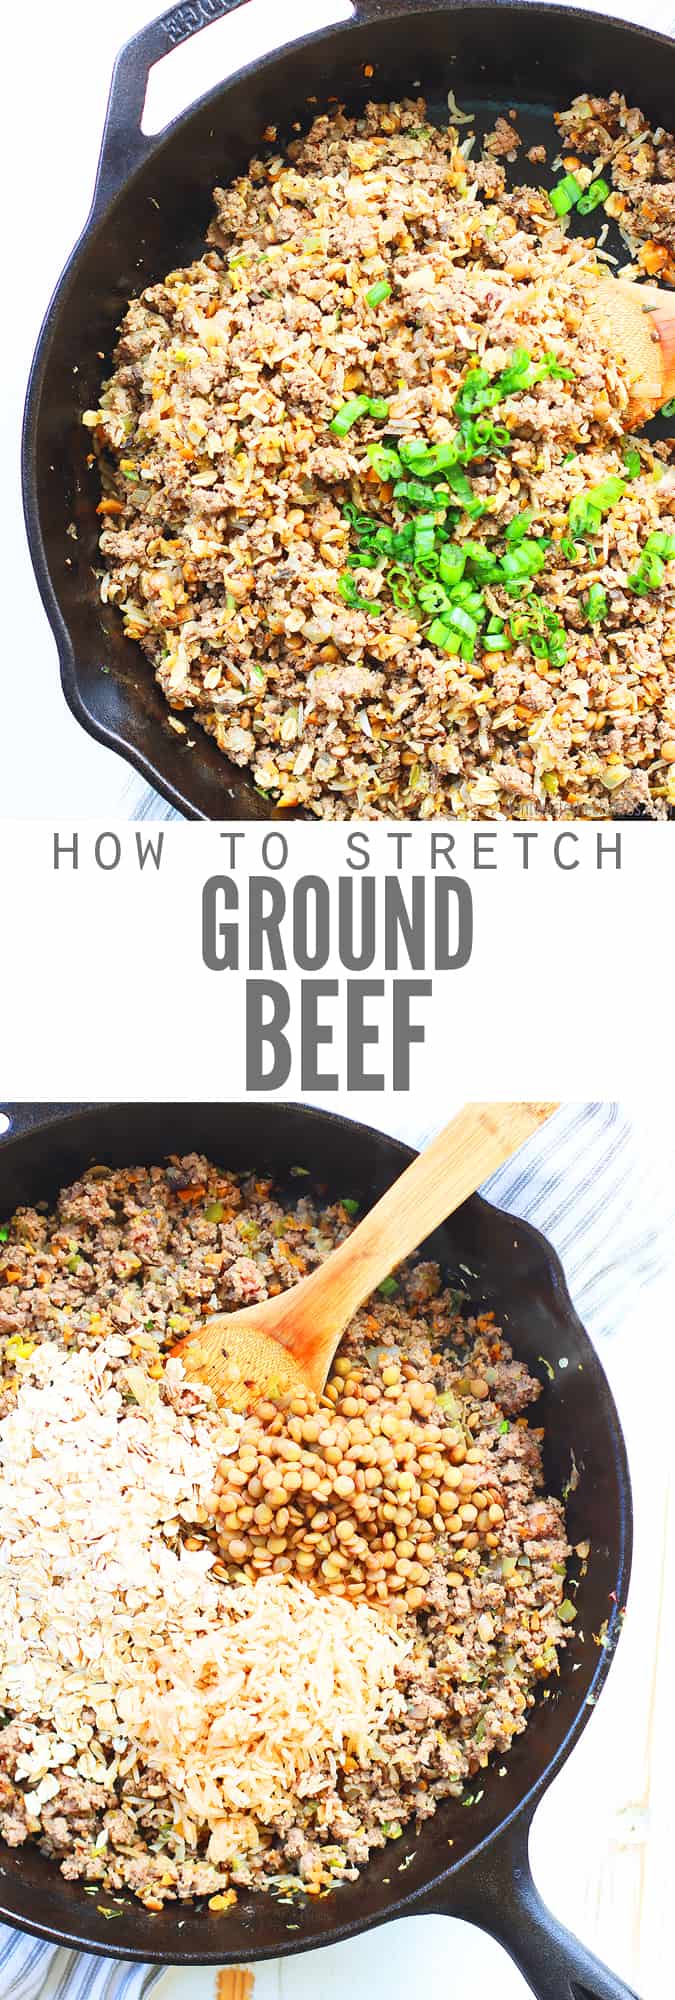 How to Stretch Ground Beef - Don't Waste the Crumbs